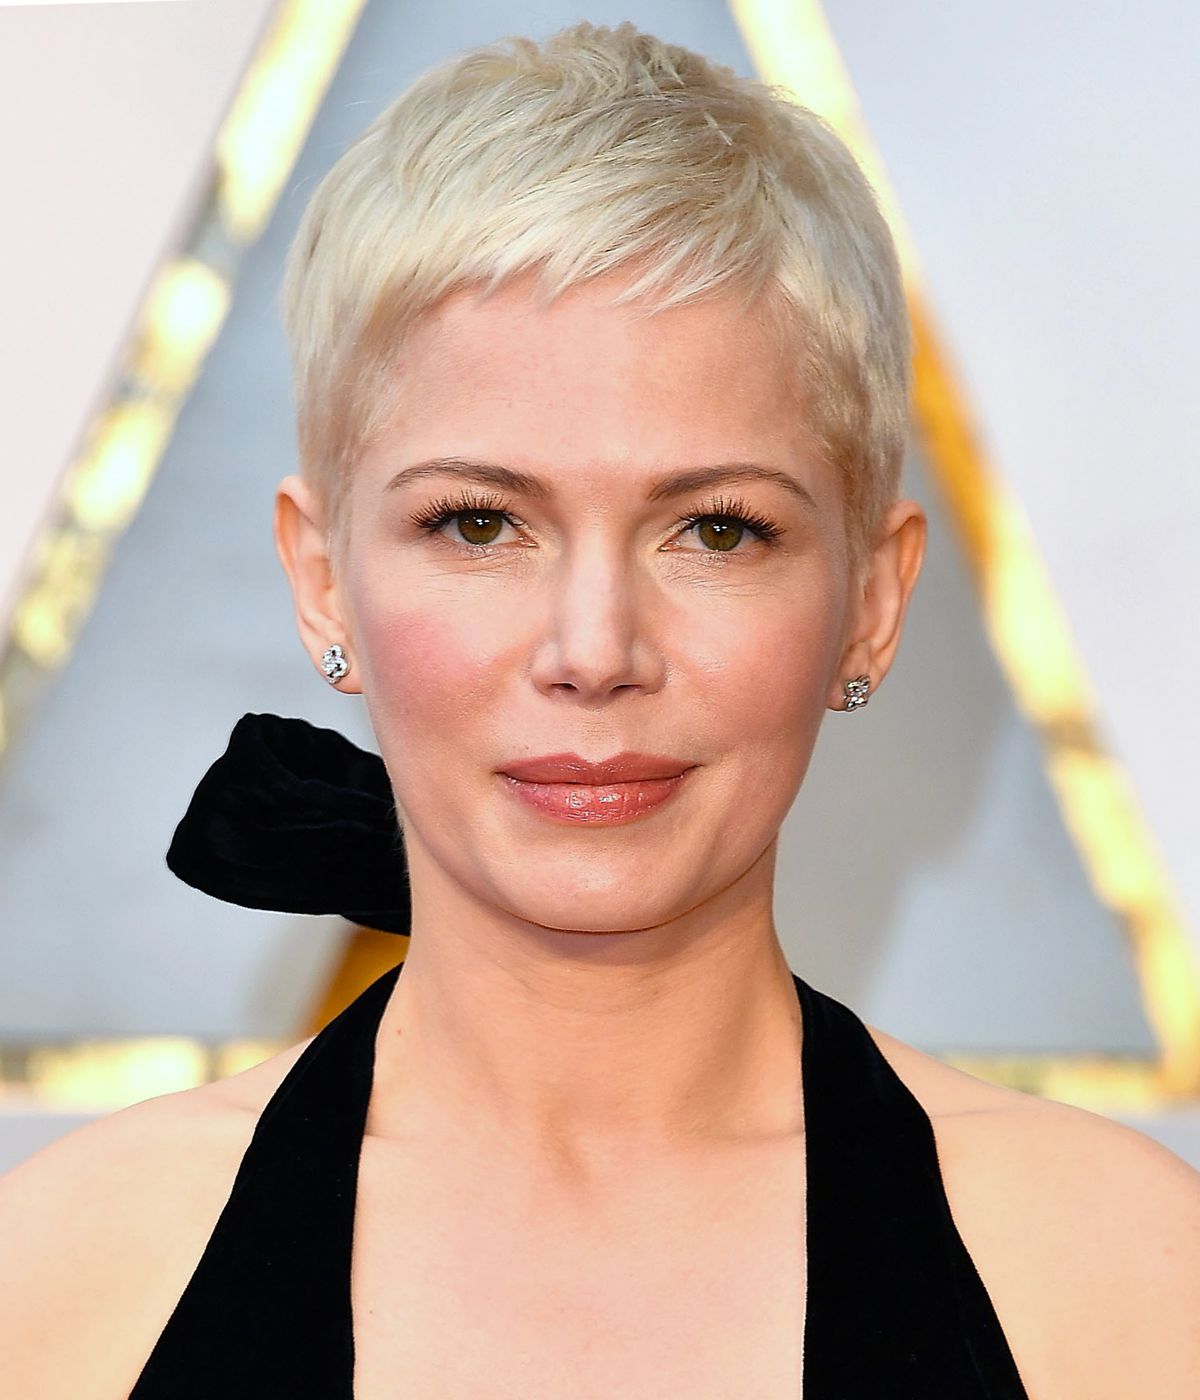 Michelle Williams arrives at the 18th Annual Screen Actors Guild Awards